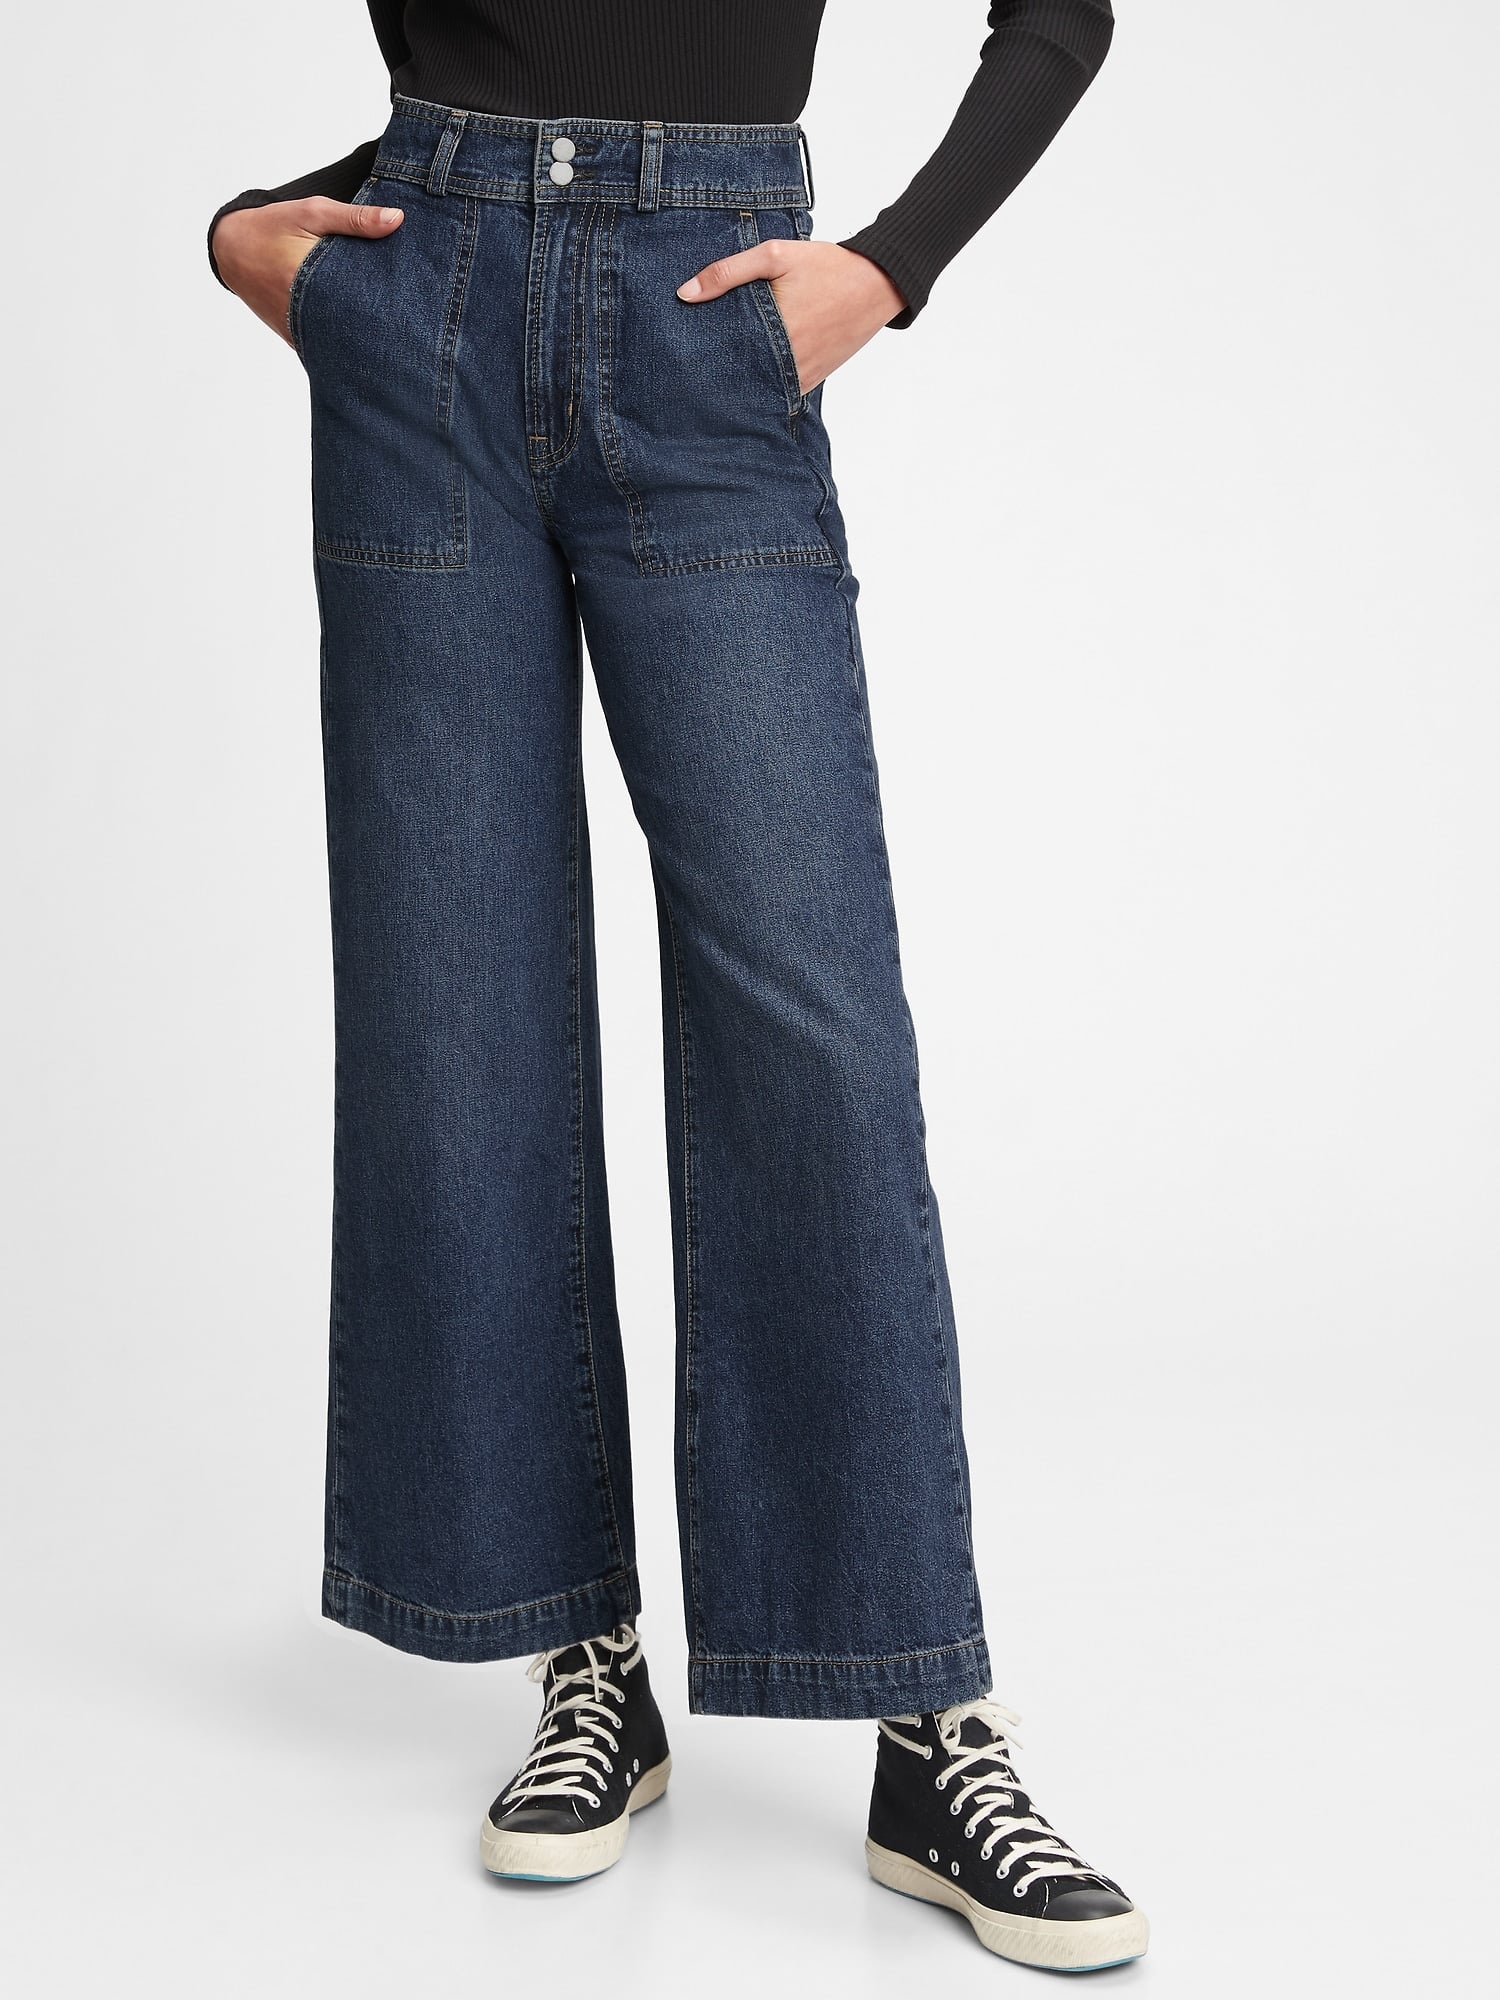 Best Wide-Leg Jeans For Petites, Review